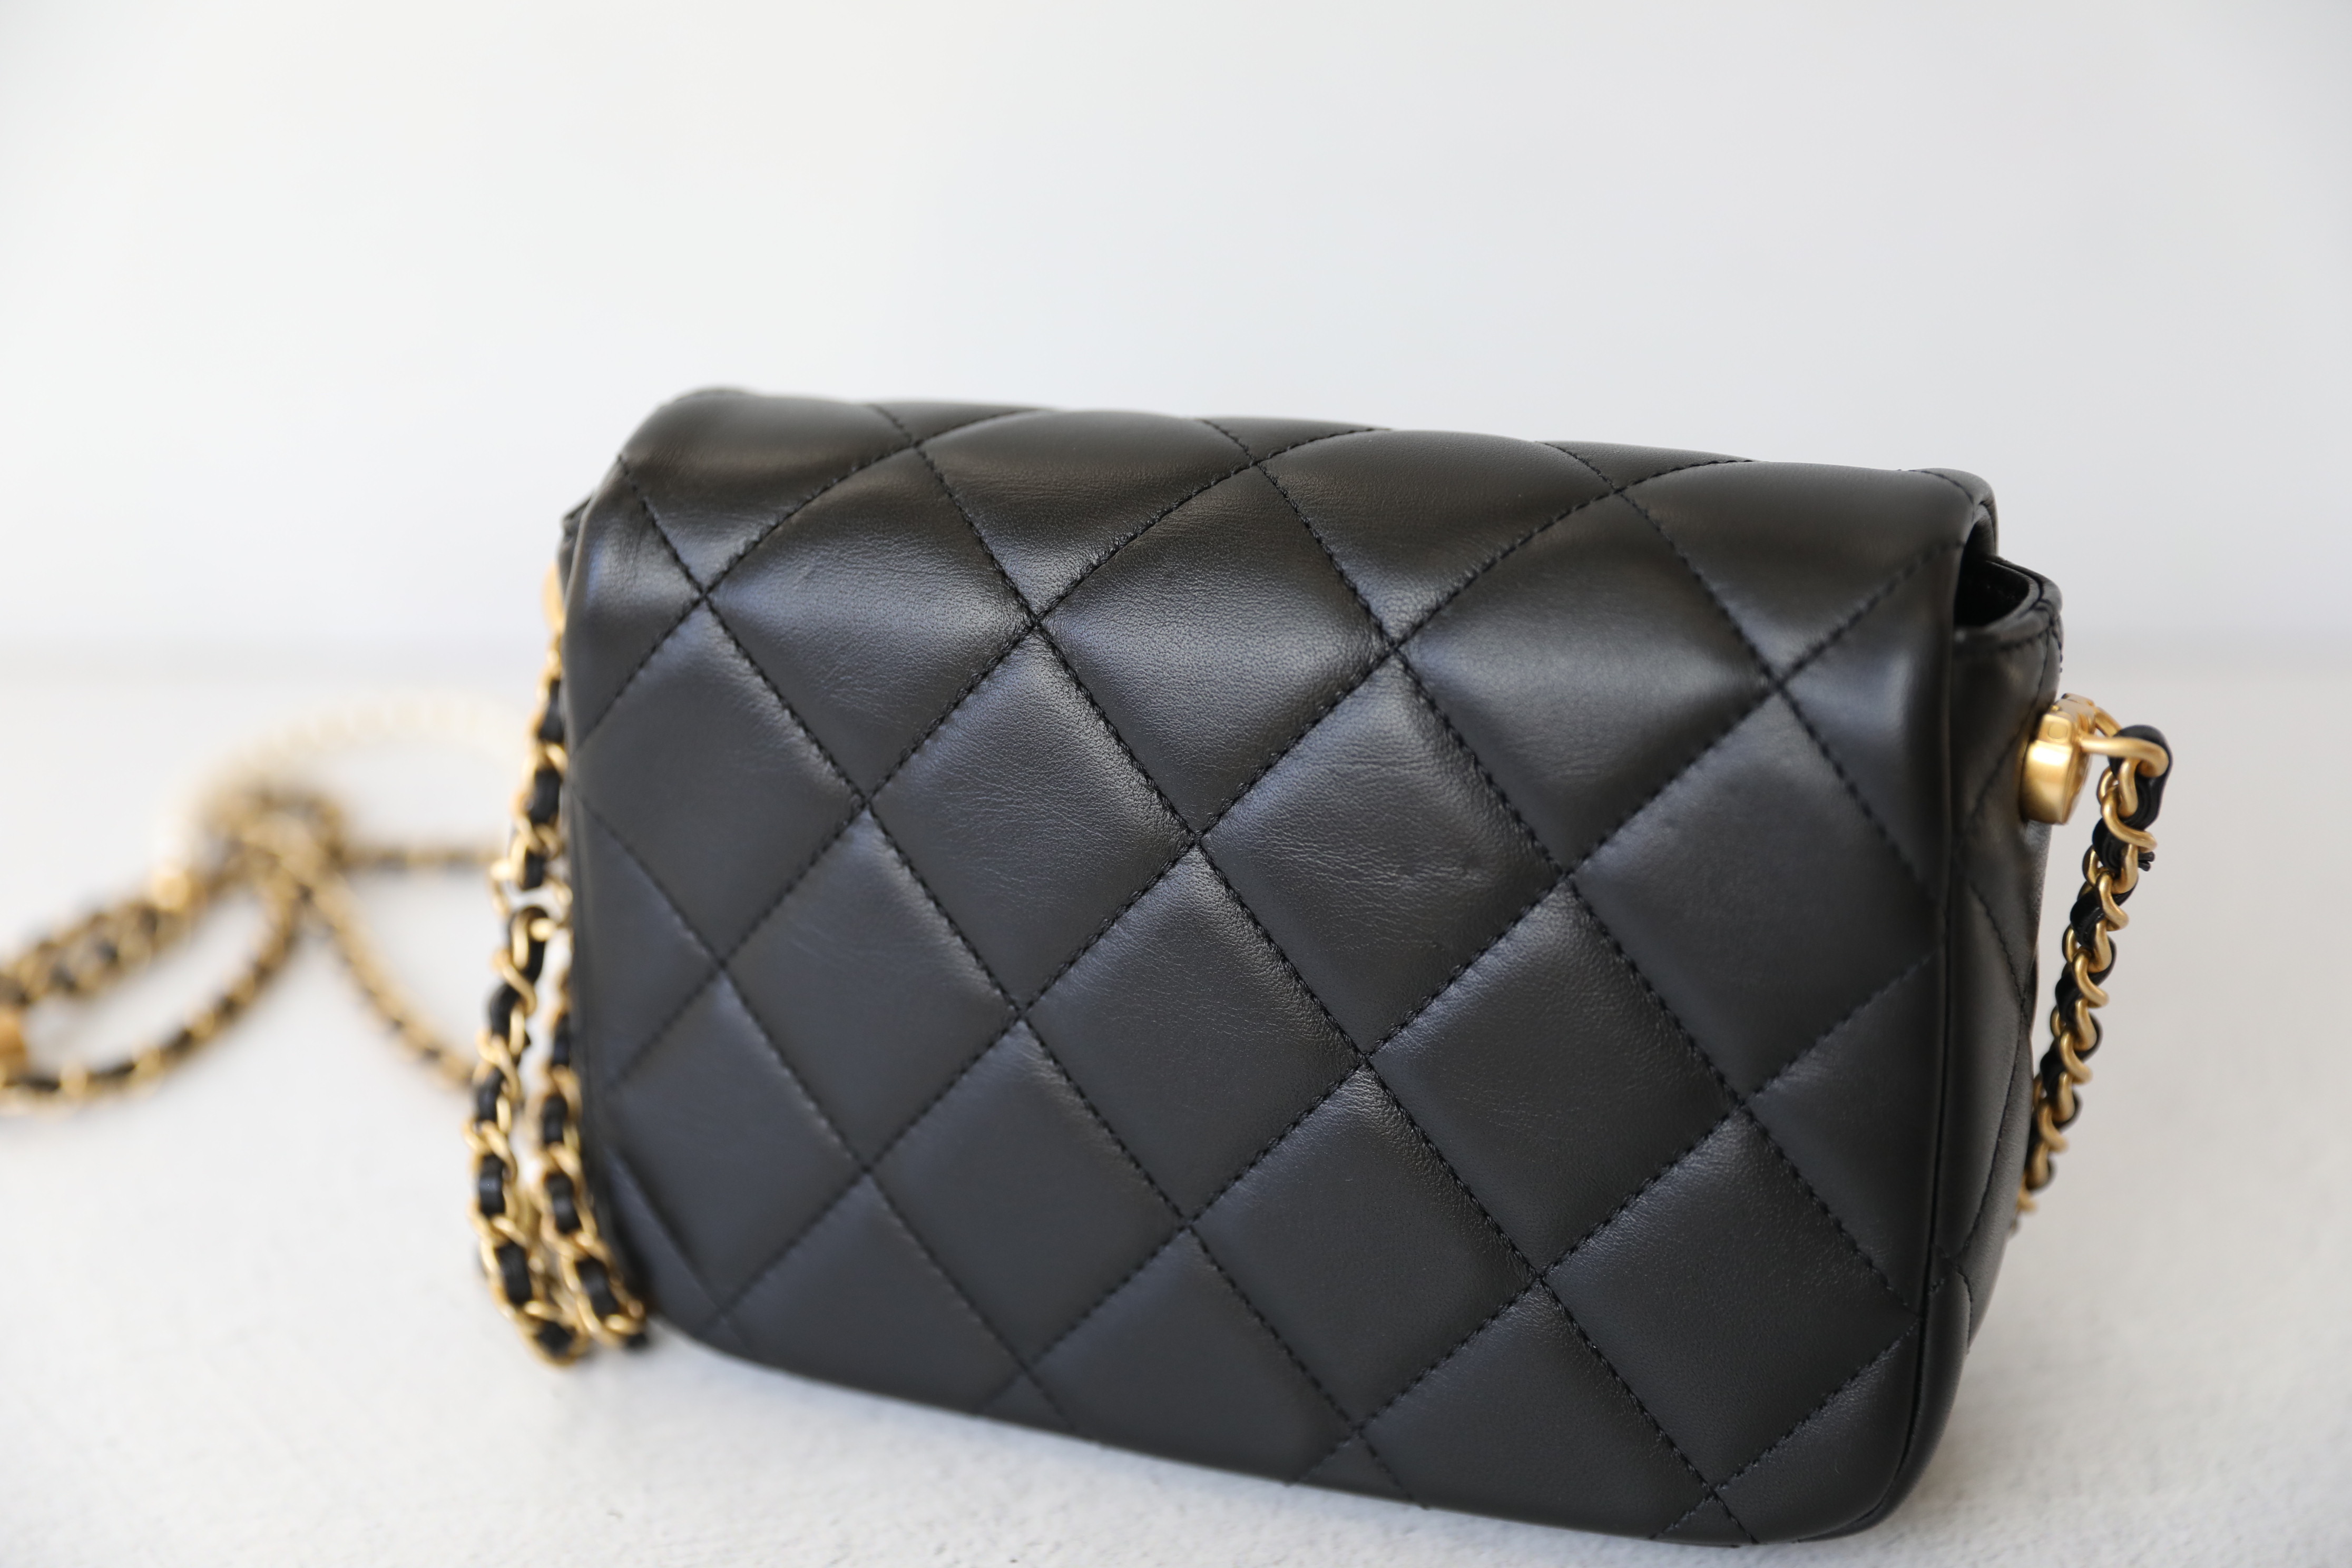 Chanel My Perfect Flap Mini, Black Lambskin with Gold and Pearl Hardware,  Preowned in Box WA001